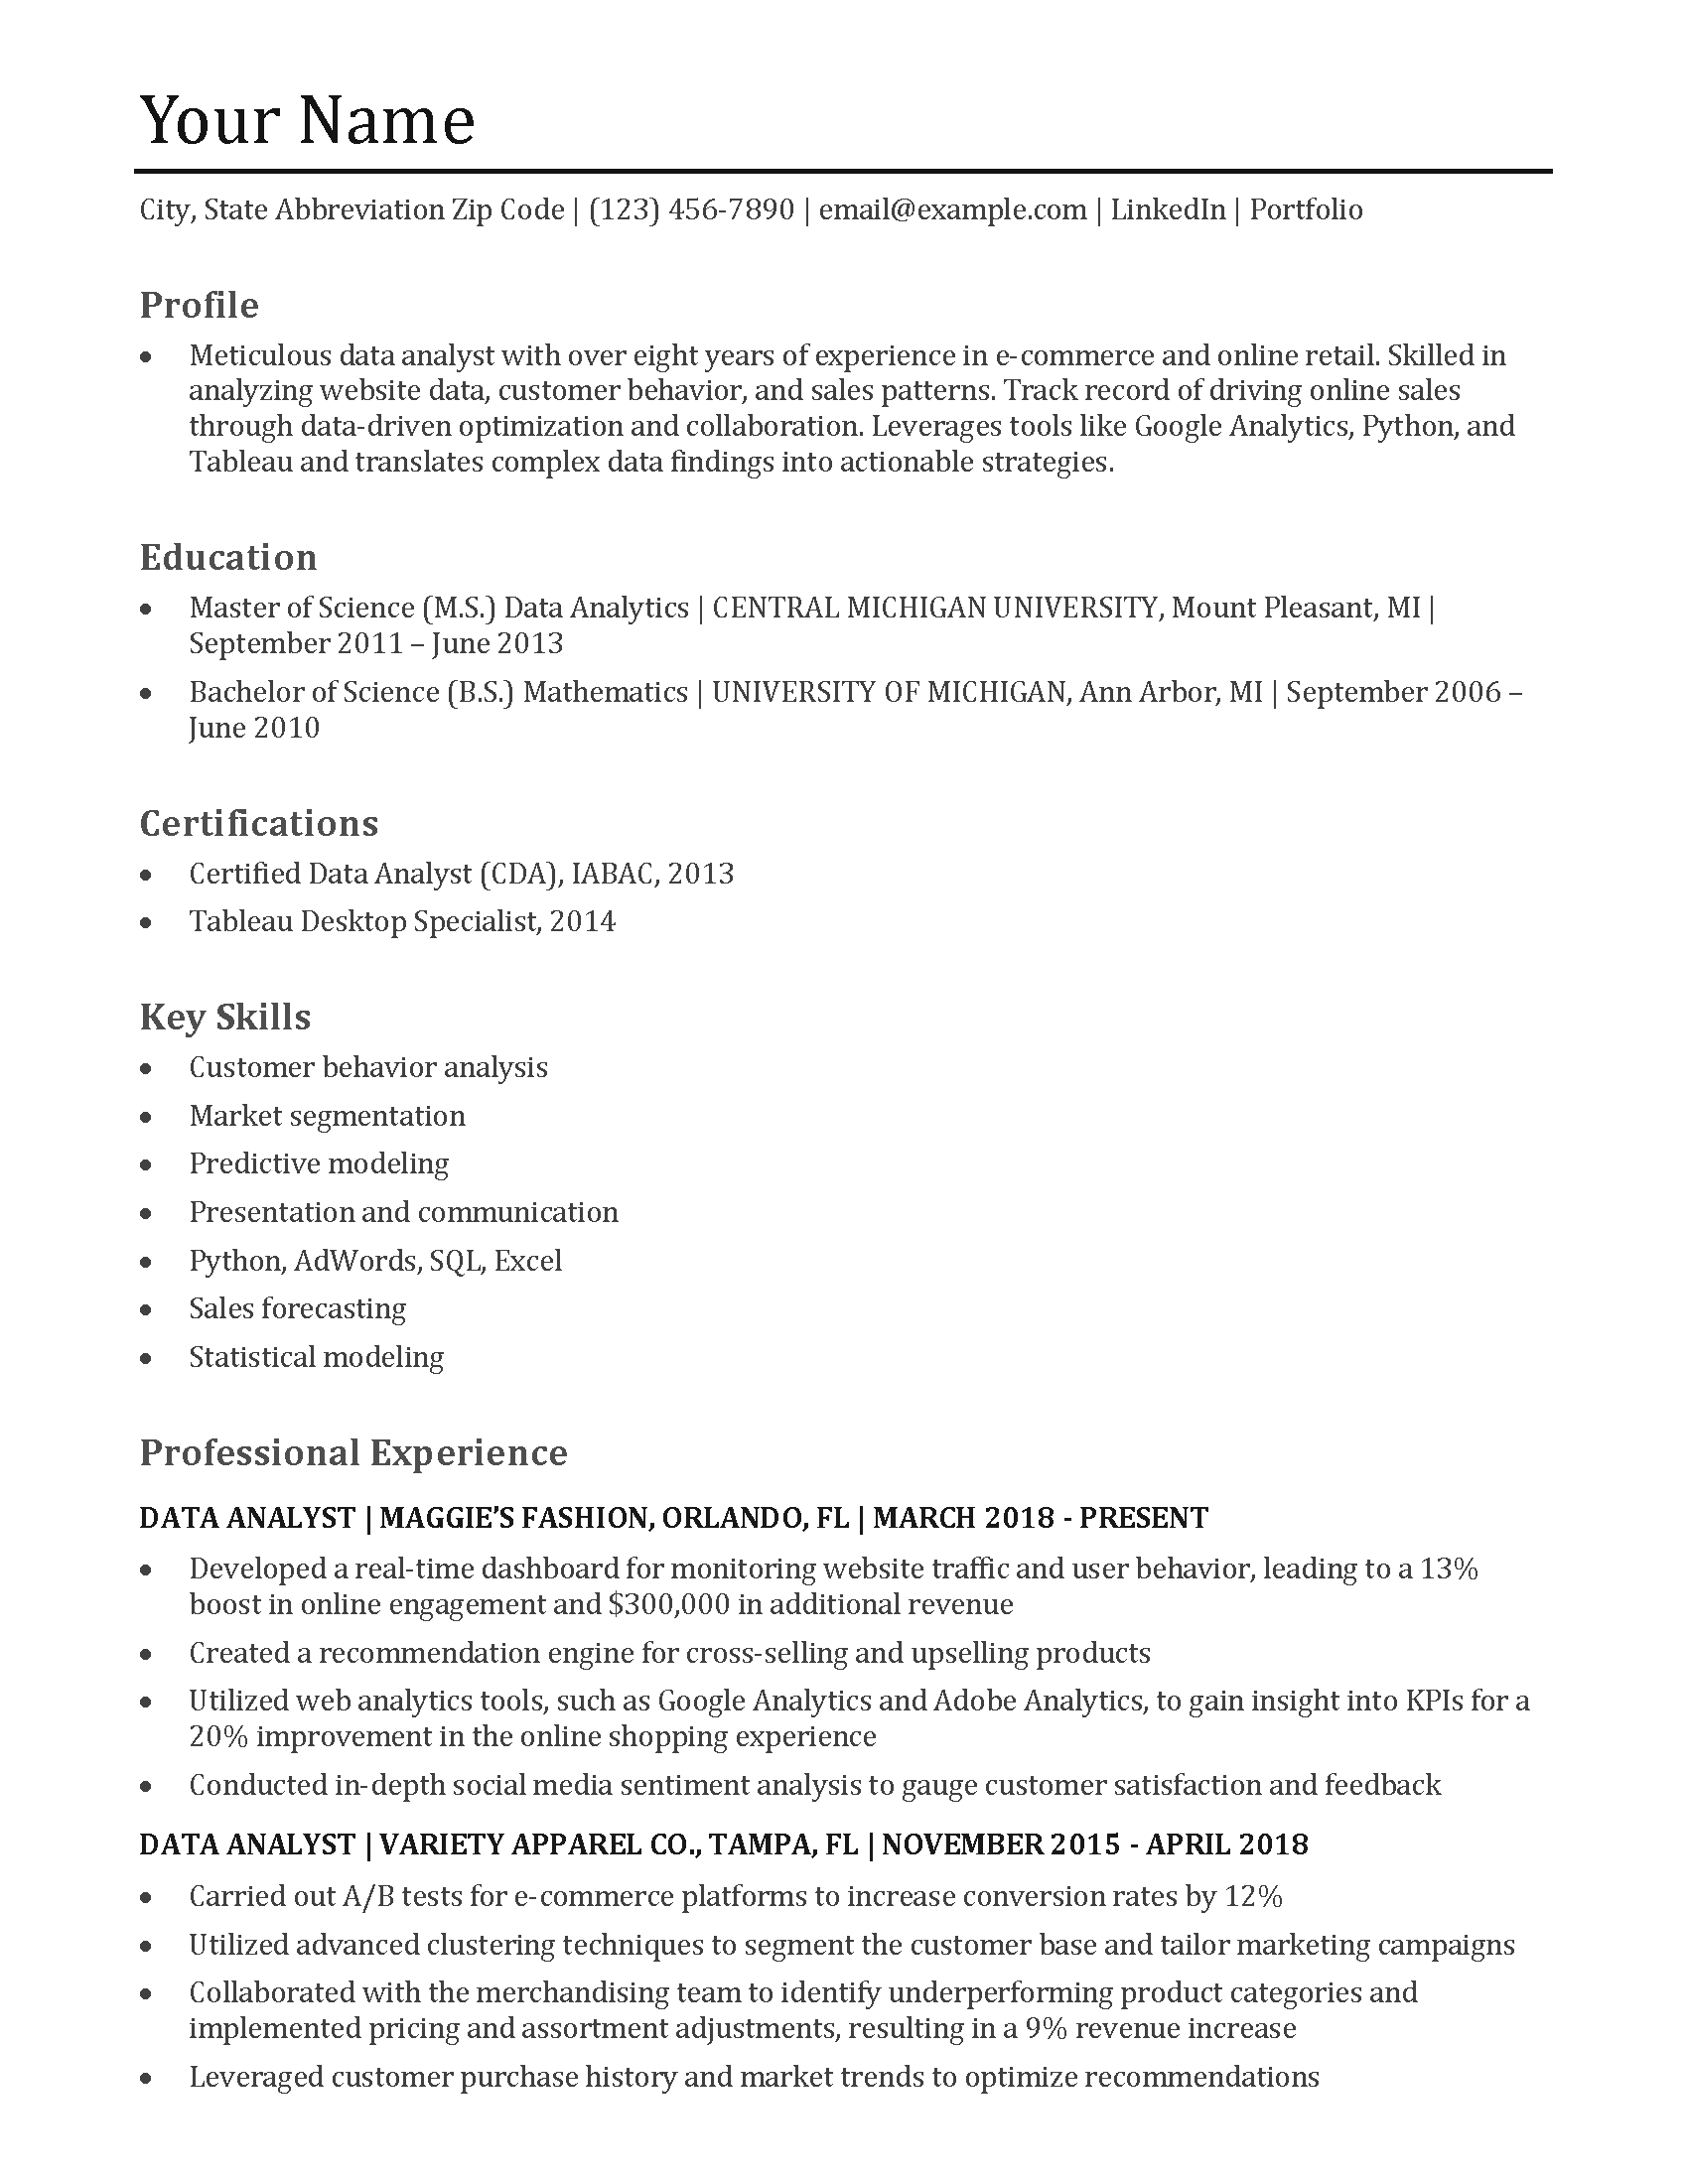 Data Analyst Resume and Examples Banner Image